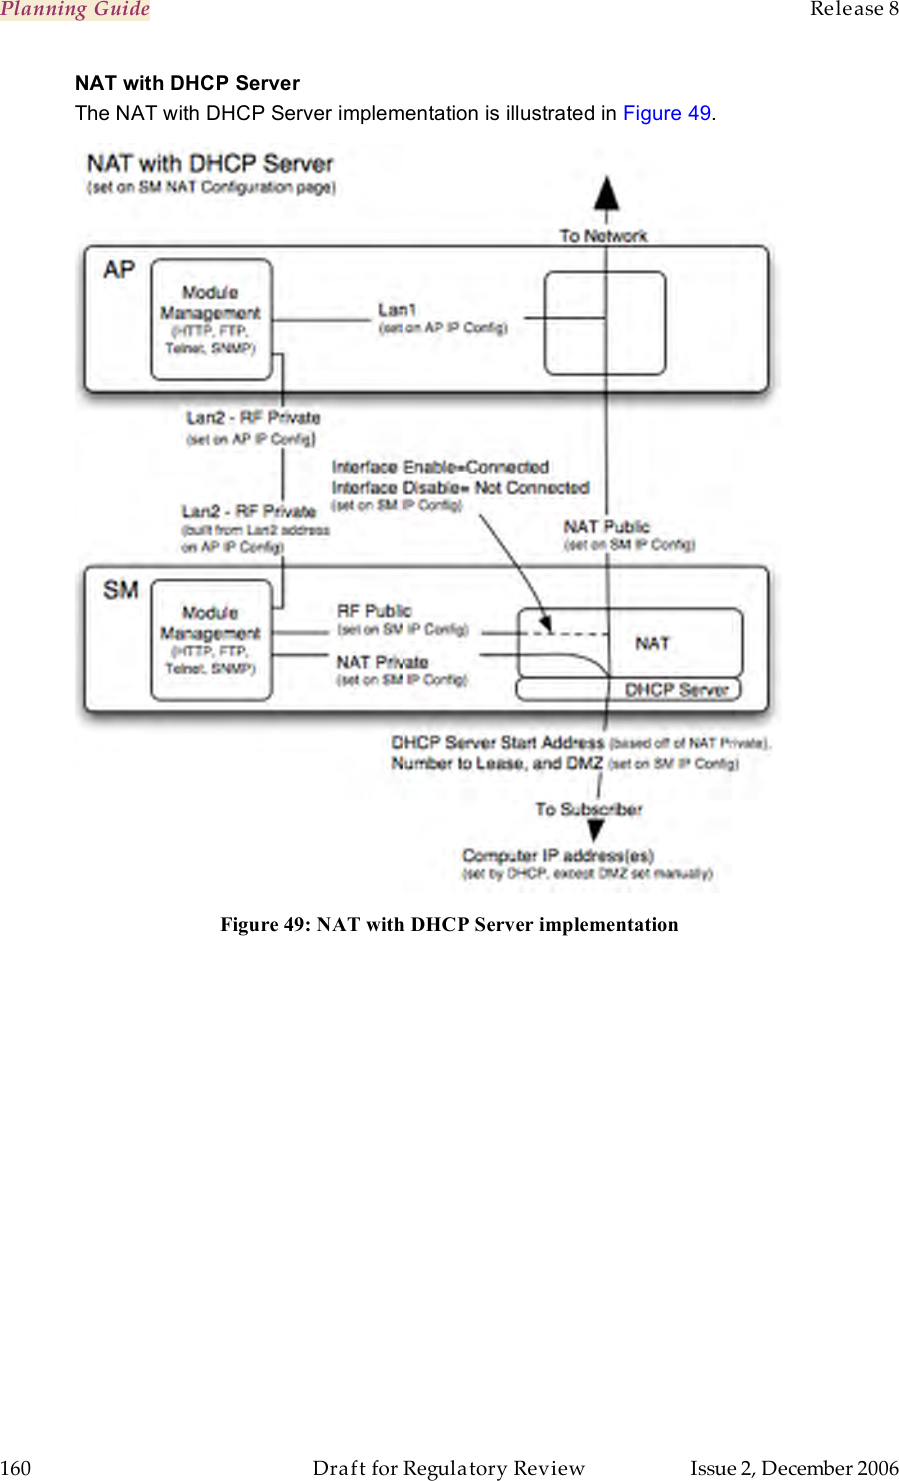 Planning Guide    Release 8   160  Draft for Regulatory Review  Issue 2, December 2006 NAT with DHCP Server The NAT with DHCP Server implementation is illustrated in Figure 49.  Figure 49: NAT with DHCP Server implementation 